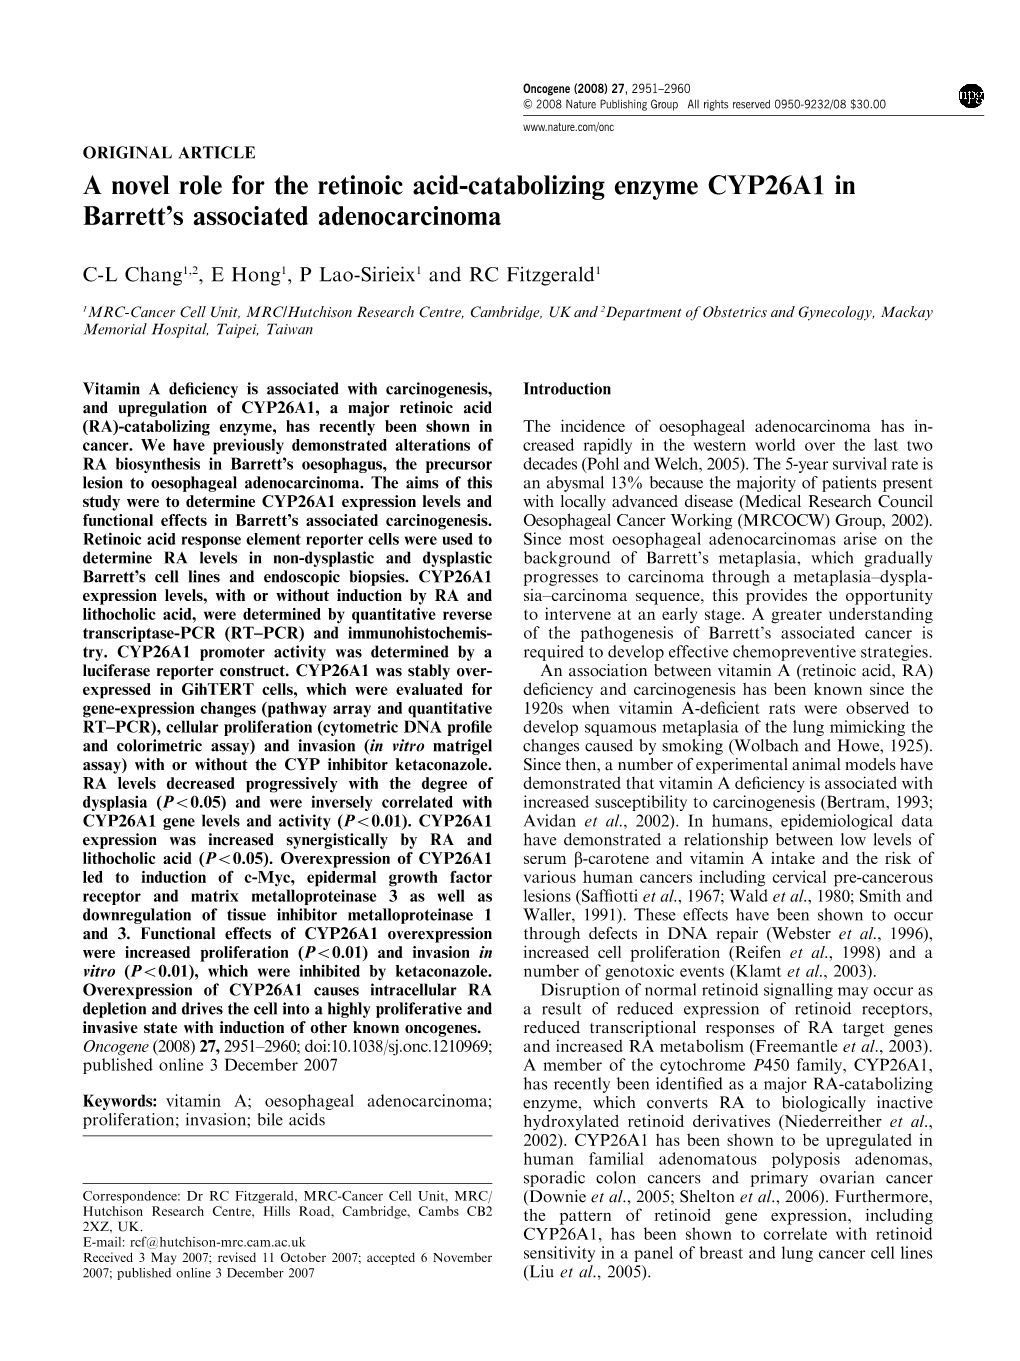 A Novel Role for the Retinoic Acid-Catabolizing Enzyme CYP26A1 in Barrett’S Associated Adenocarcinoma